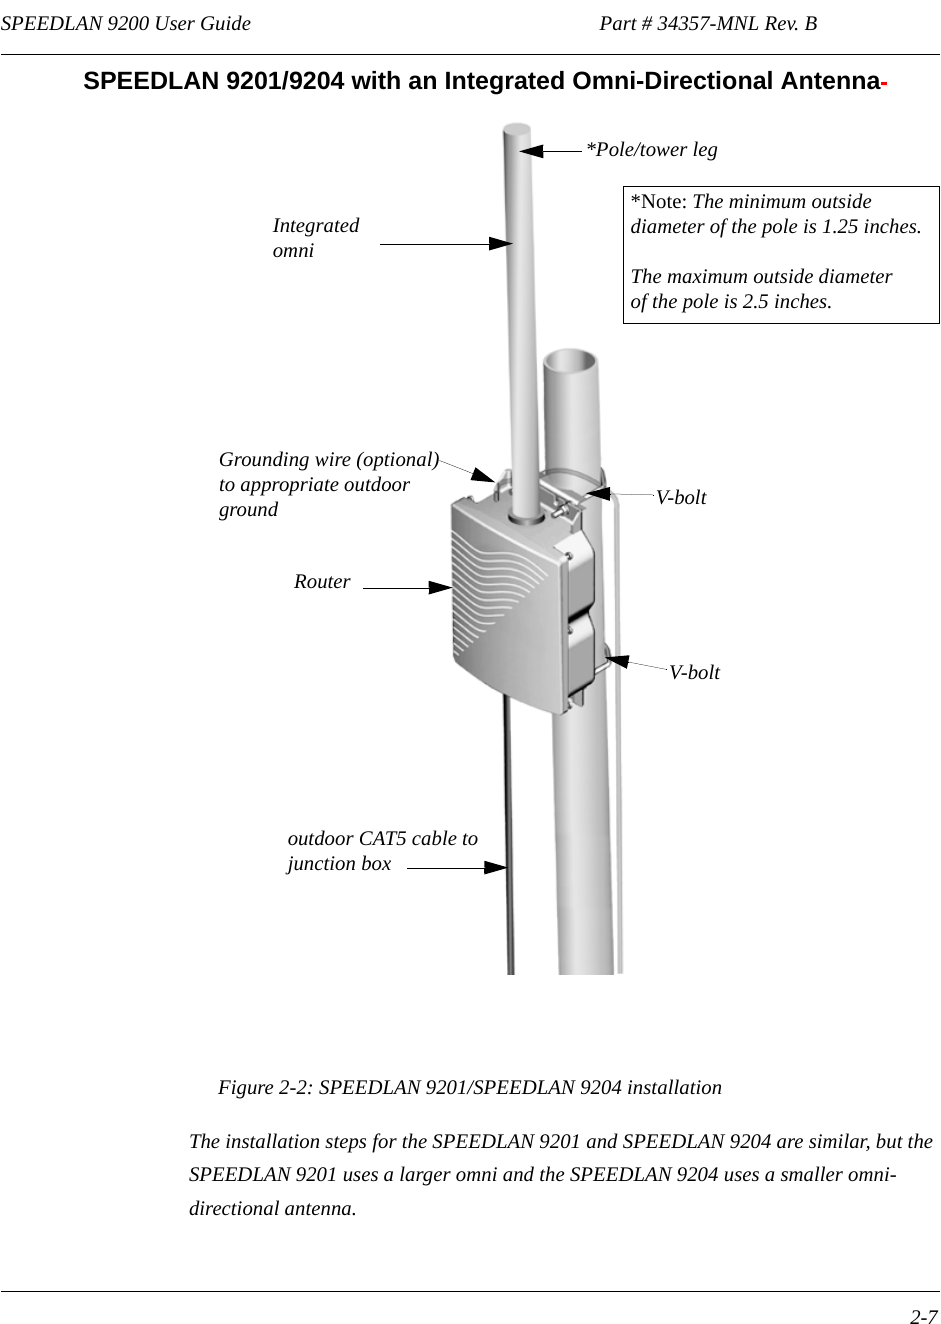 SPEEDLAN 9200 User Guide                                                                   Part # 34357-MNL Rev. B      2-7                                                                                                                                                               SPEEDLAN 9201/9204 with an Integrated Omni-Directional Antenna Figure 2-2: SPEEDLAN 9201/SPEEDLAN 9204 installationThe installation steps for the SPEEDLAN 9201 and SPEEDLAN 9204 are similar, but the SPEEDLAN 9201 uses a larger omni and the SPEEDLAN 9204 uses a smaller omni- directional antenna.Integrated outdoor CAT5 cable to*Pole/tower legGrounding wire (optional)junction boxV-bolt       Router               omniV-bolt  *Note: The minimum outsidediameter of the pole is 1.25 inches.The maximum outside diameterof the pole is 2.5 inches.to appropriate outdoorground  